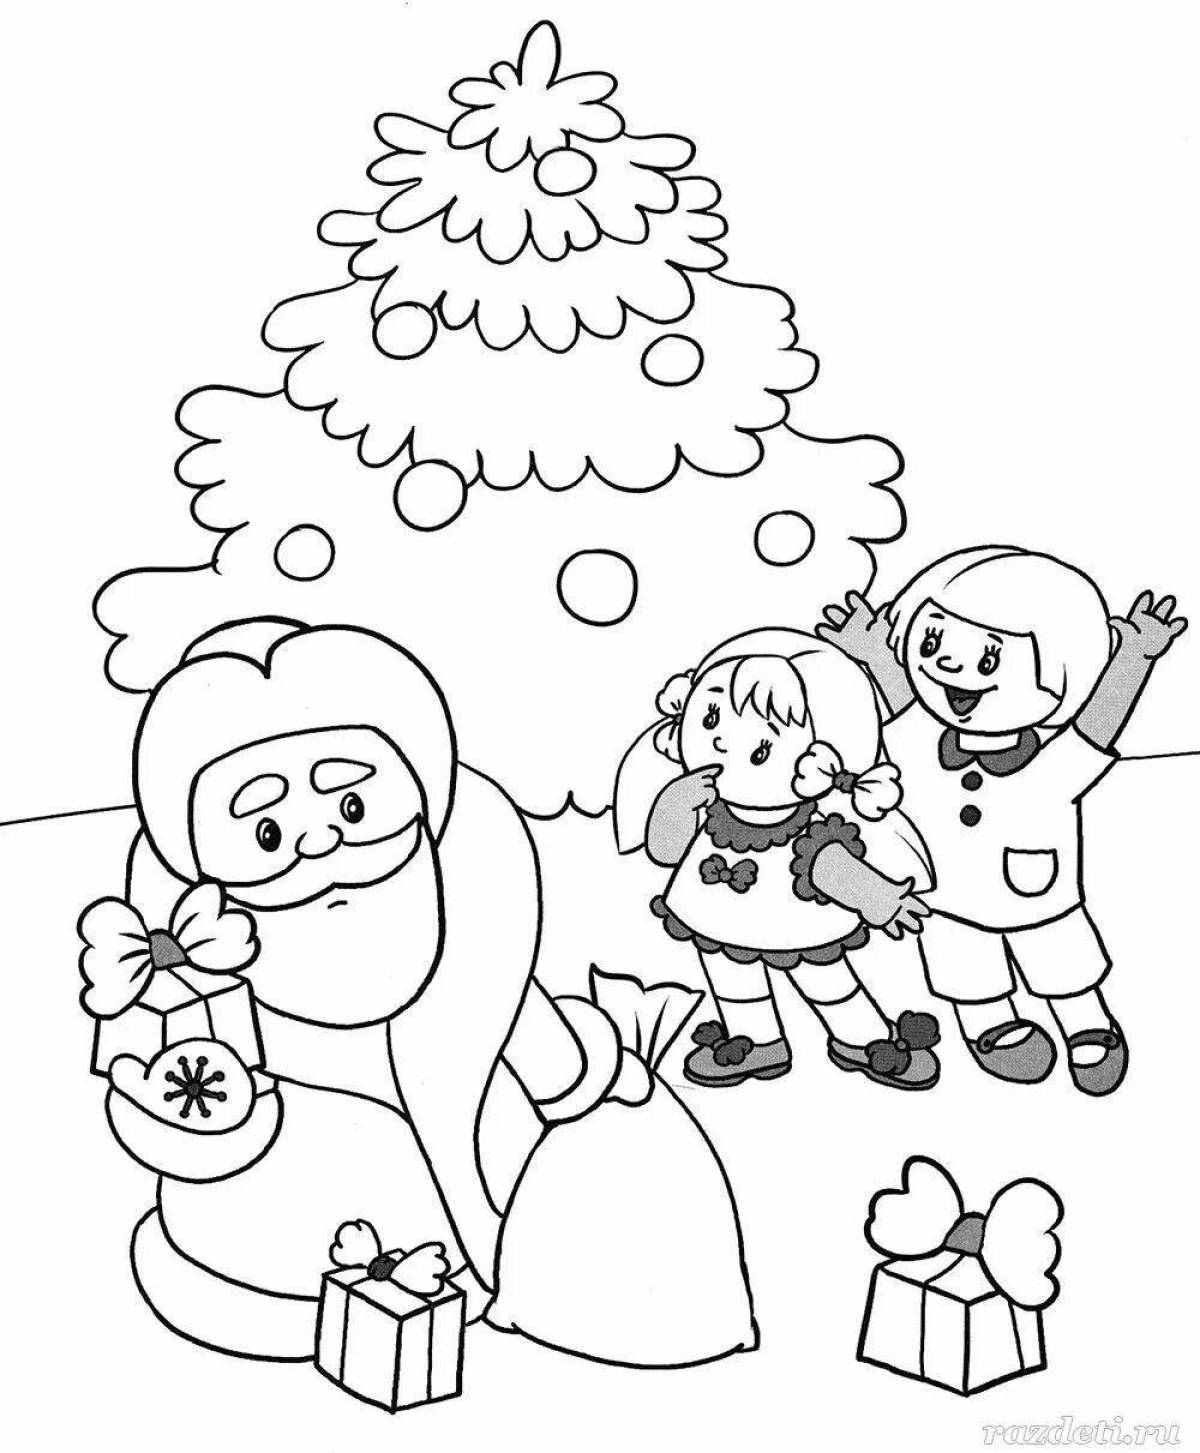 Joyful coloring page 4 5 years of winter